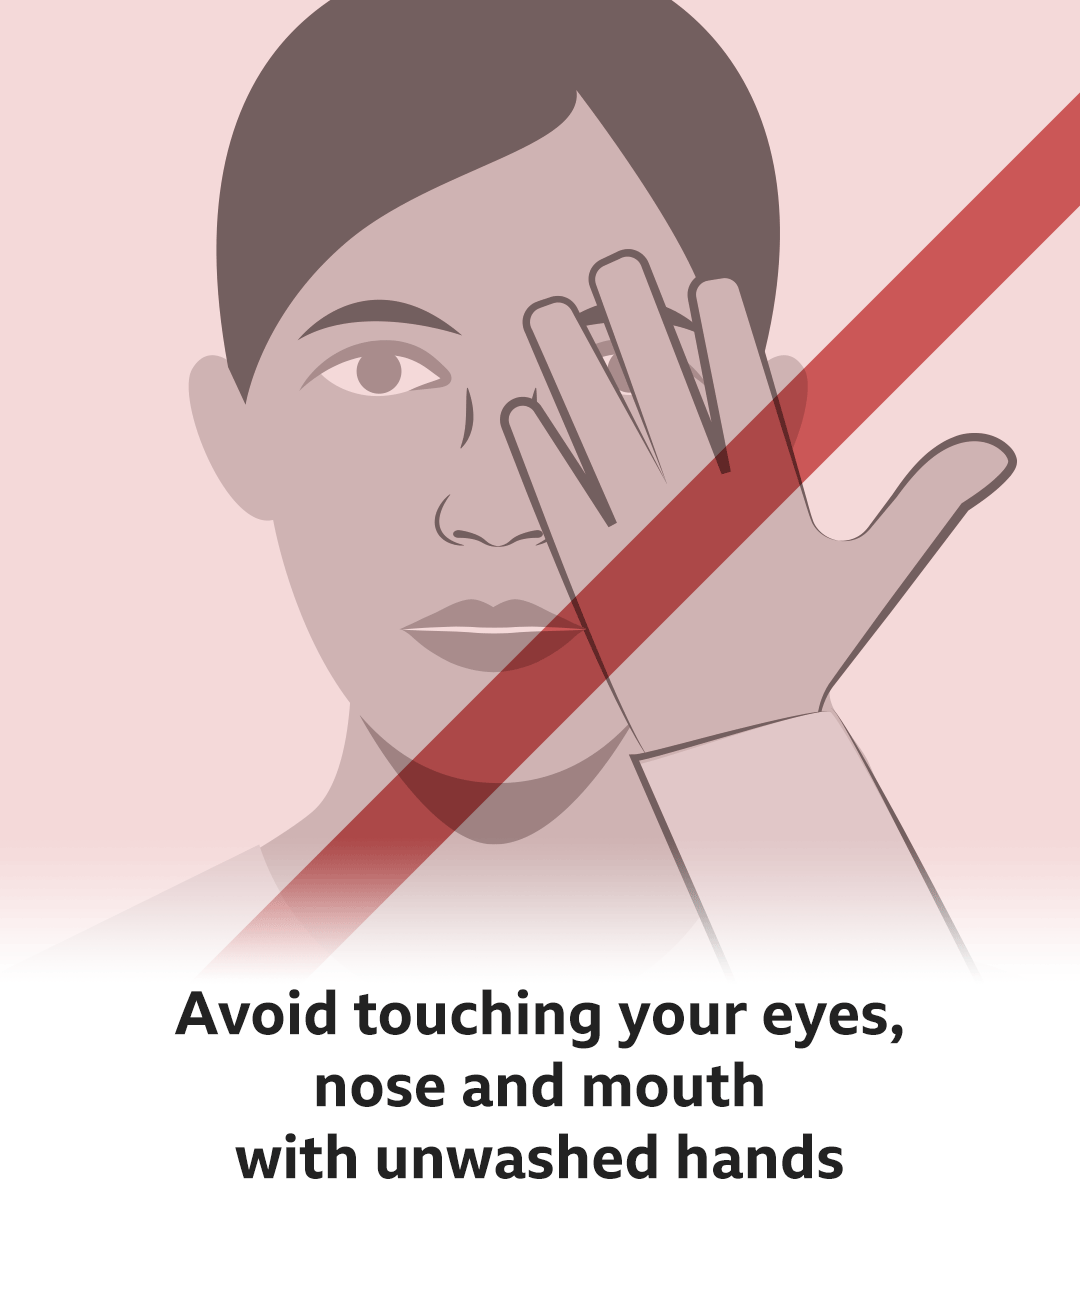 Text reads: Avoid touching your eyes, nose and mouth with unwashed hands